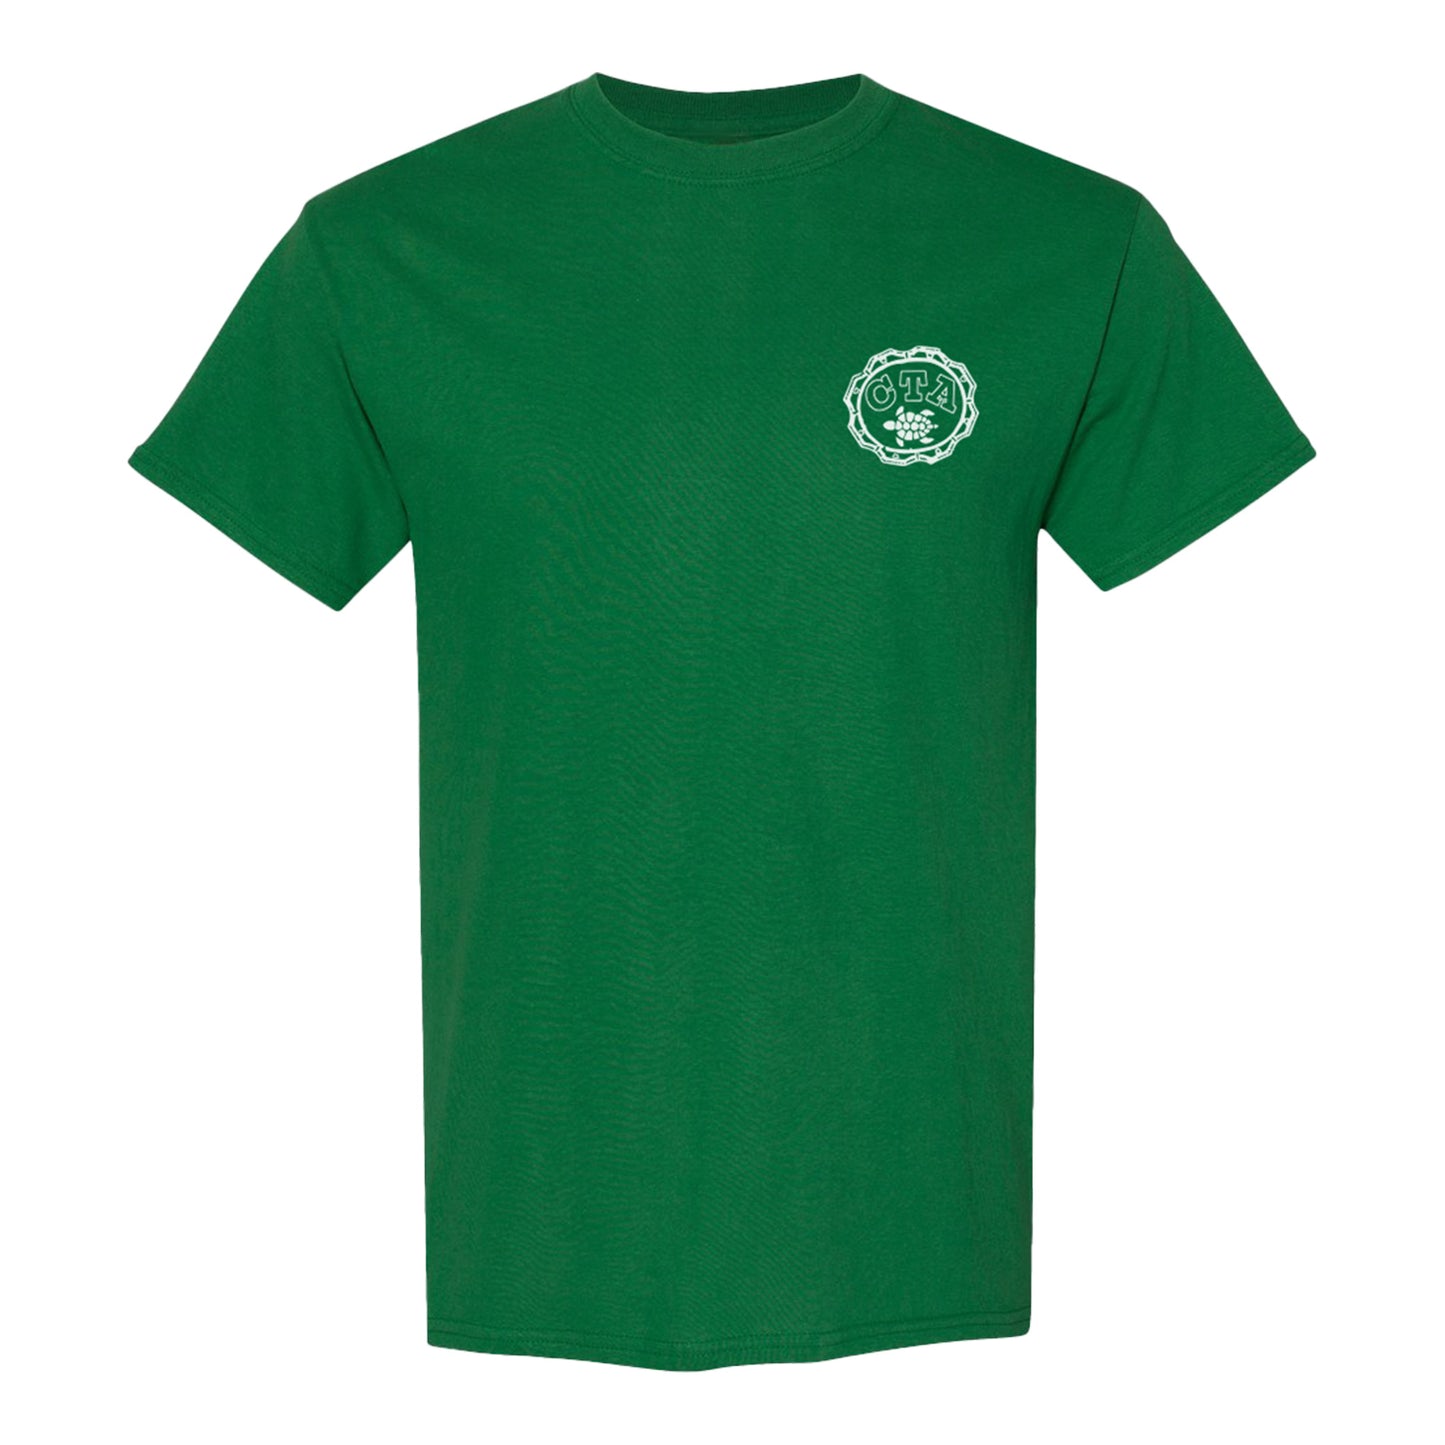 Cowboys' Turtle Association Retro T-Shirt in Green - Front View